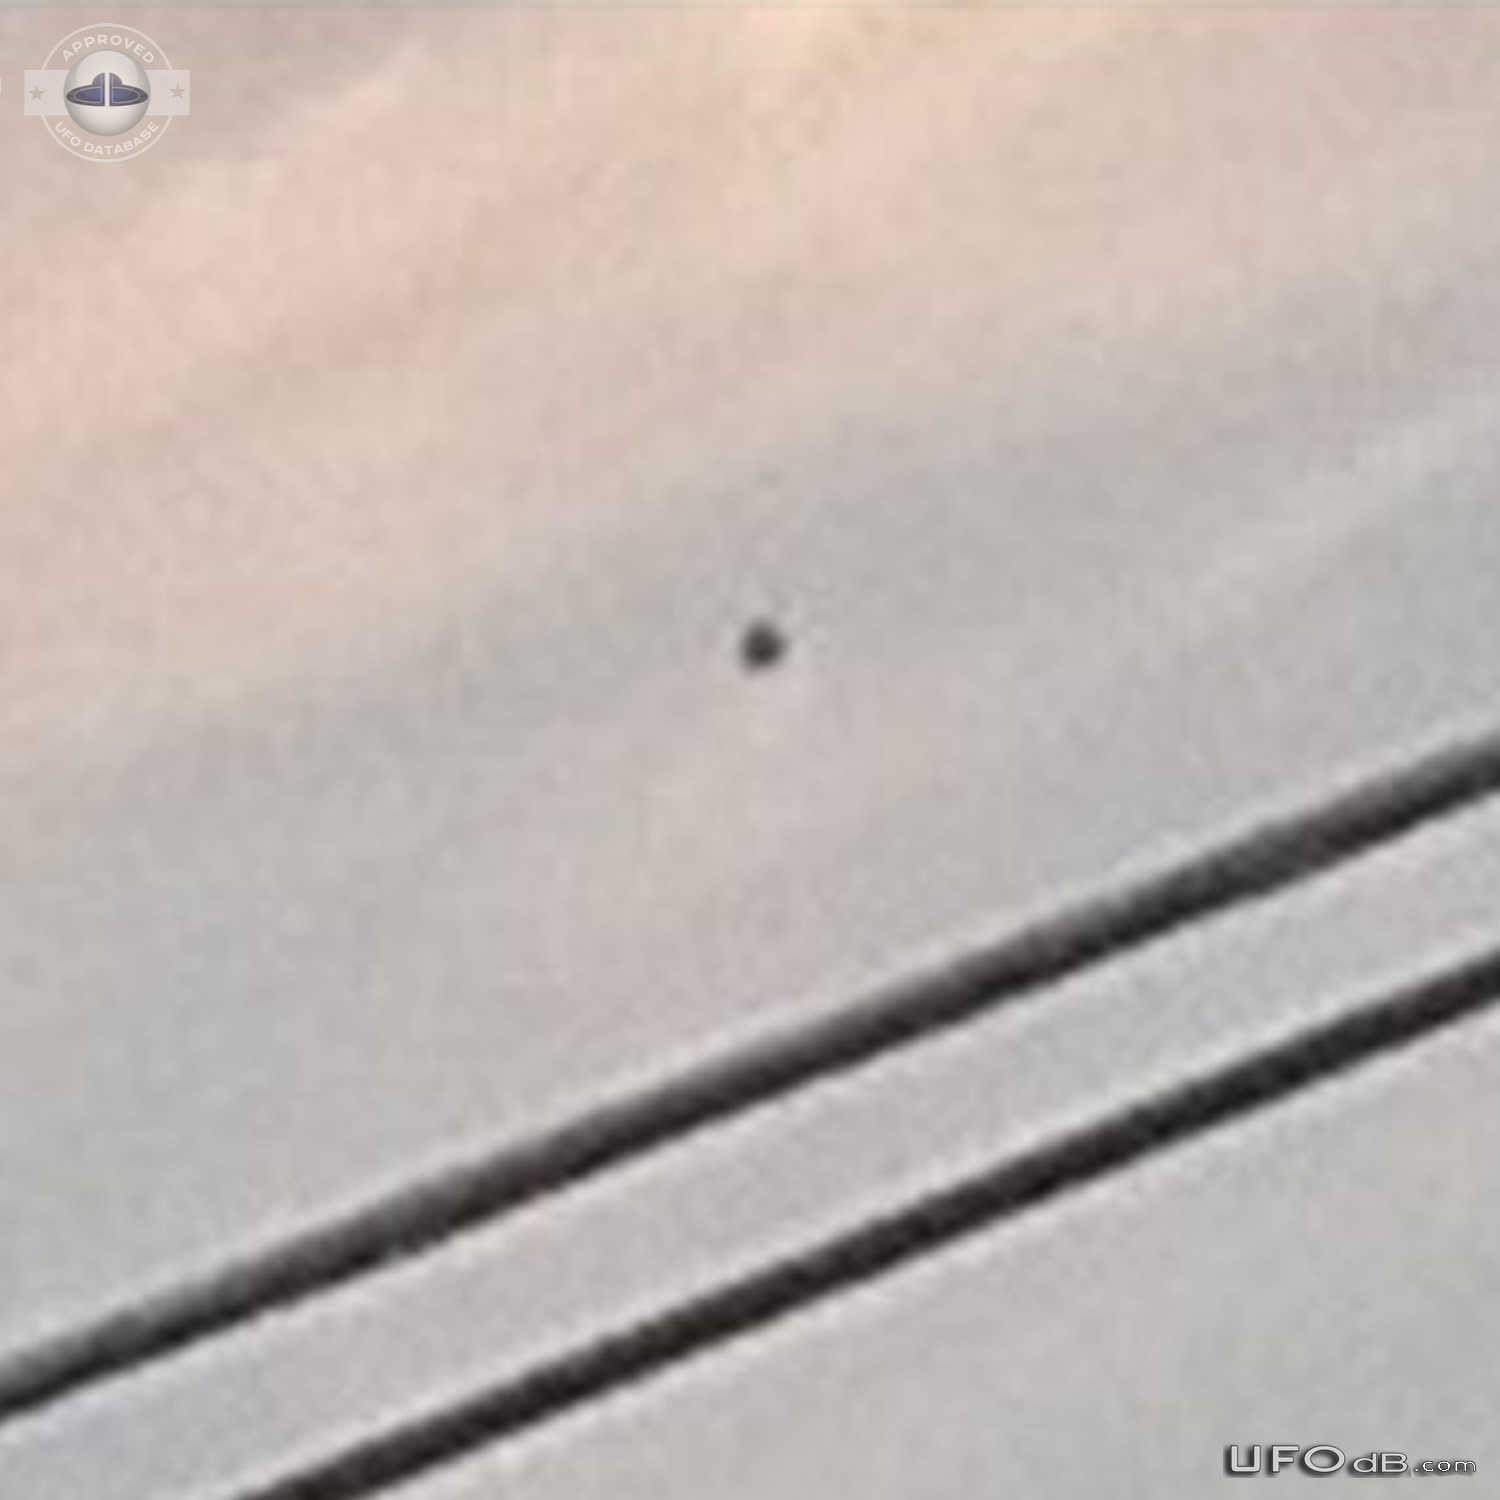 Stationary black orb observed while stuck in traffic in Aurora Colorad UFO Picture #848-4